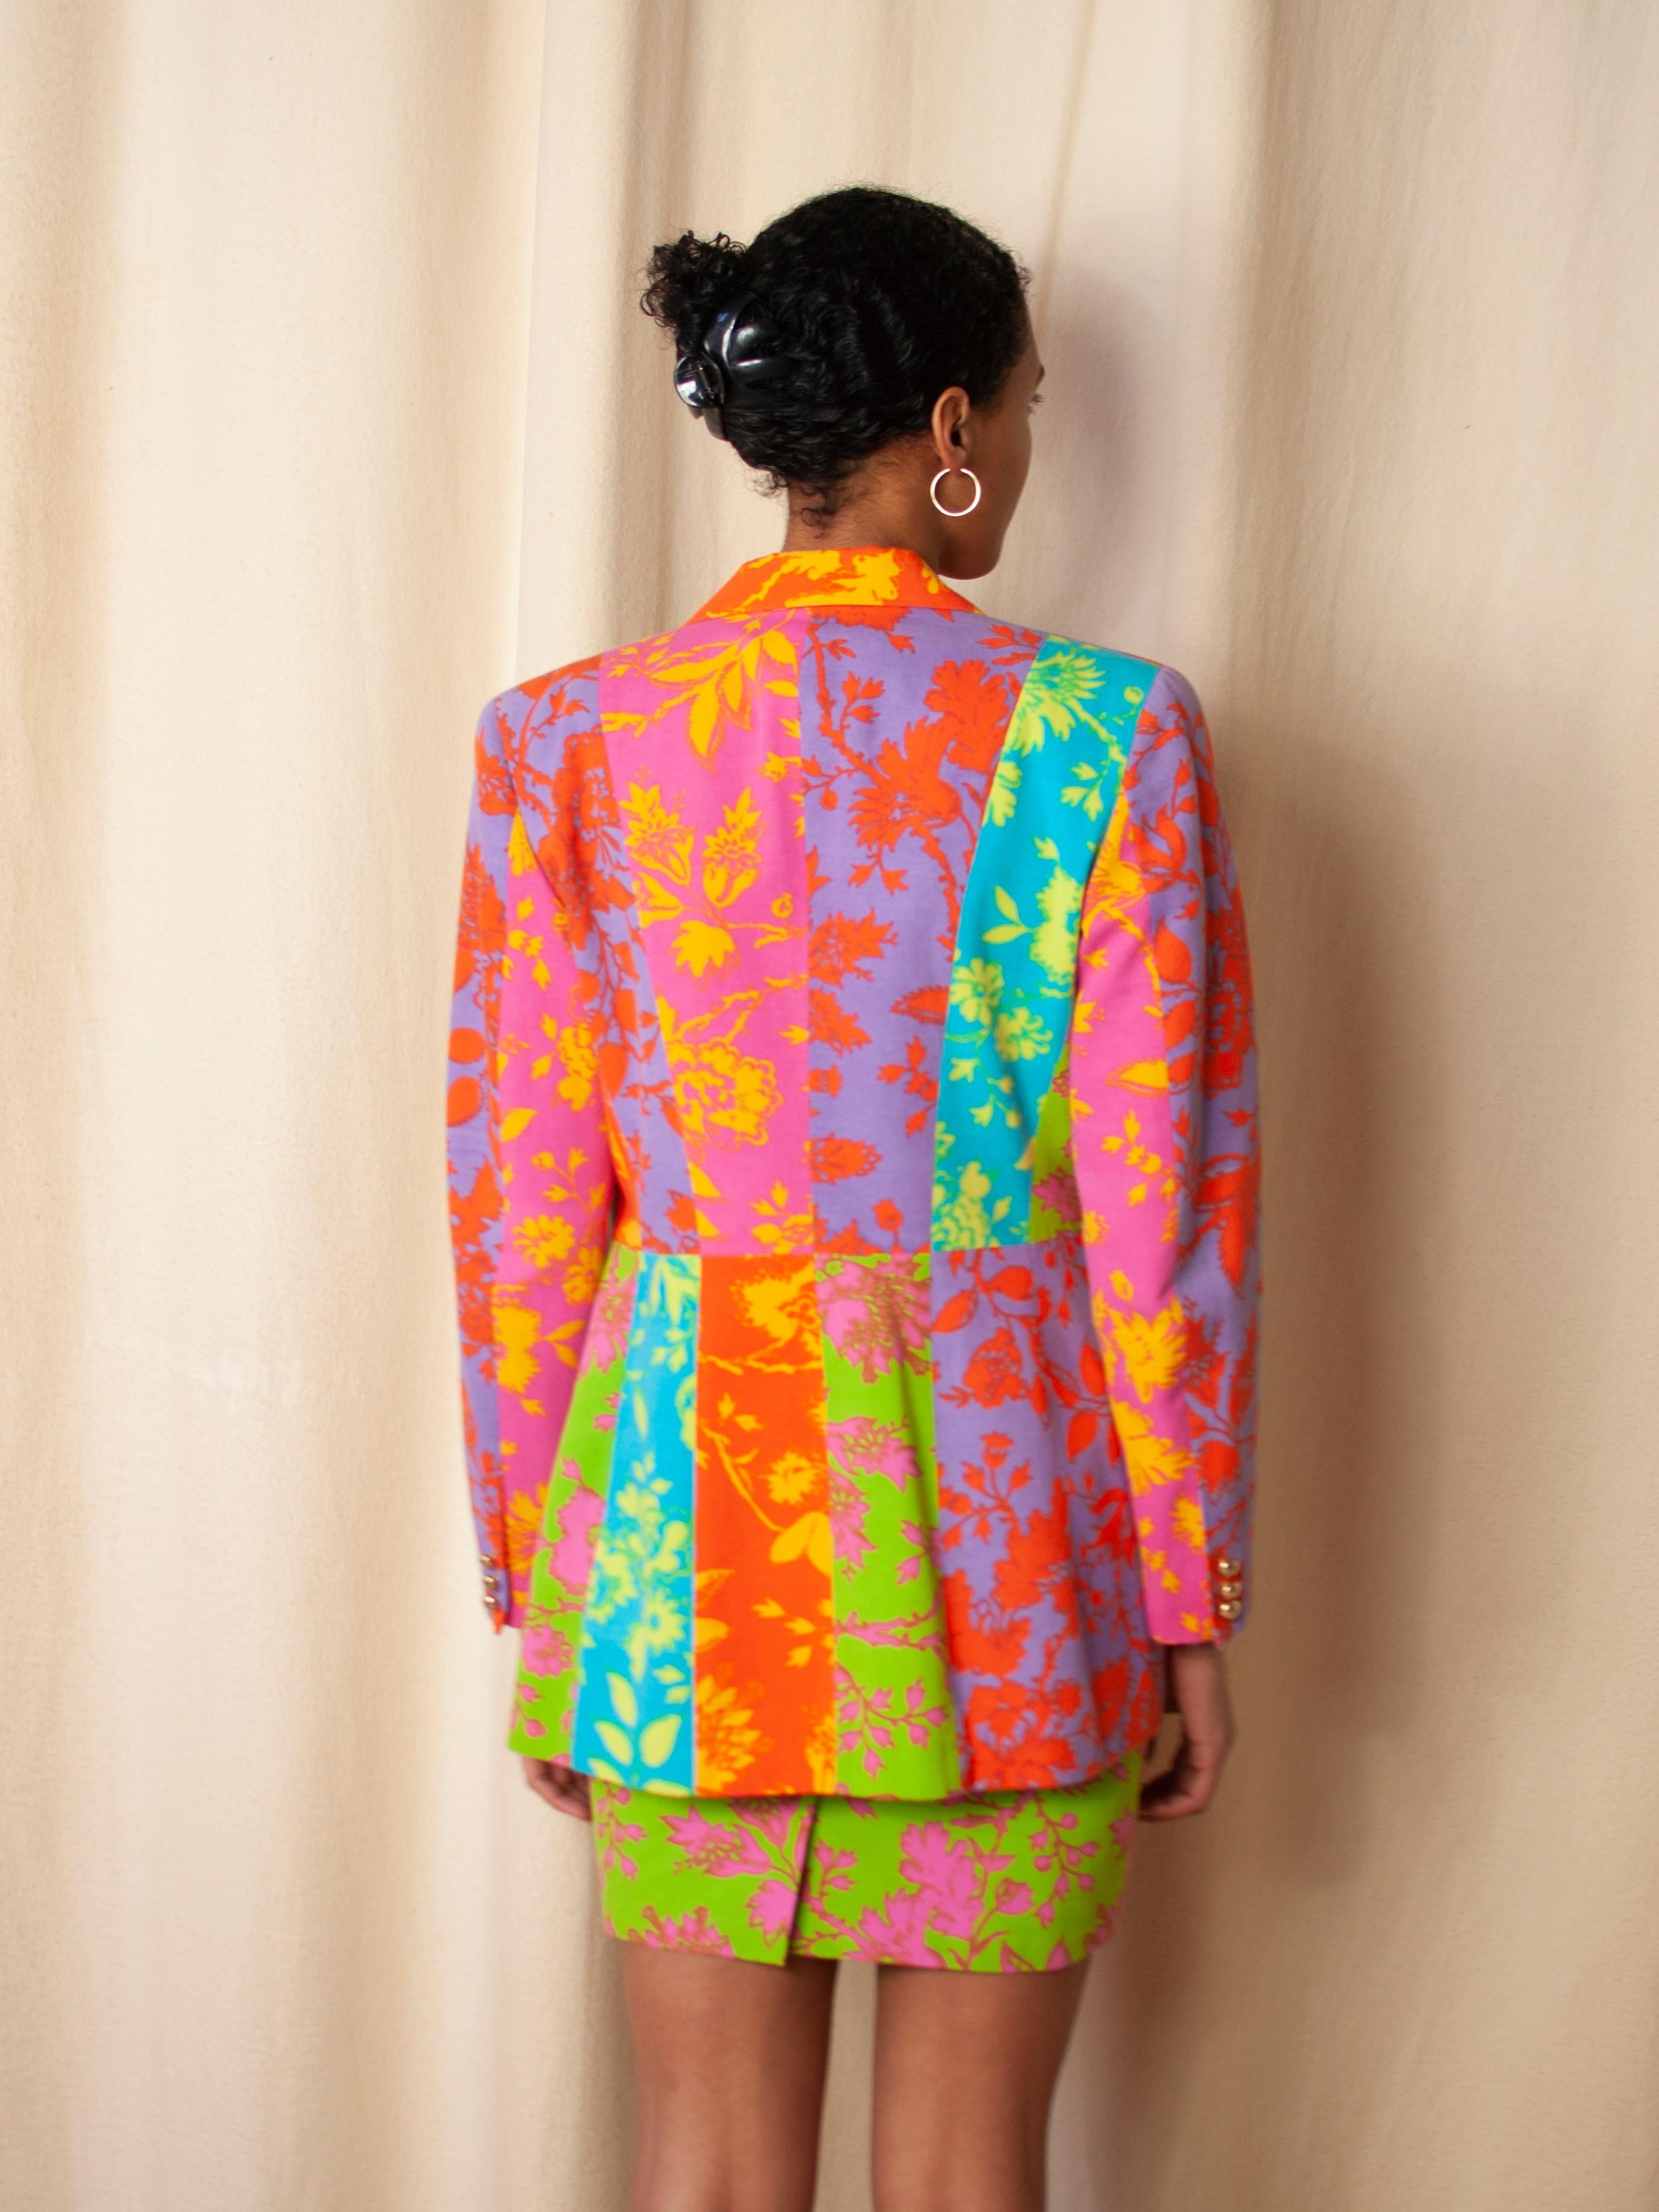 Oliver by Valentino Multicolour Floral Patchwork Pencilskirt Suit 1990s For Sale 10